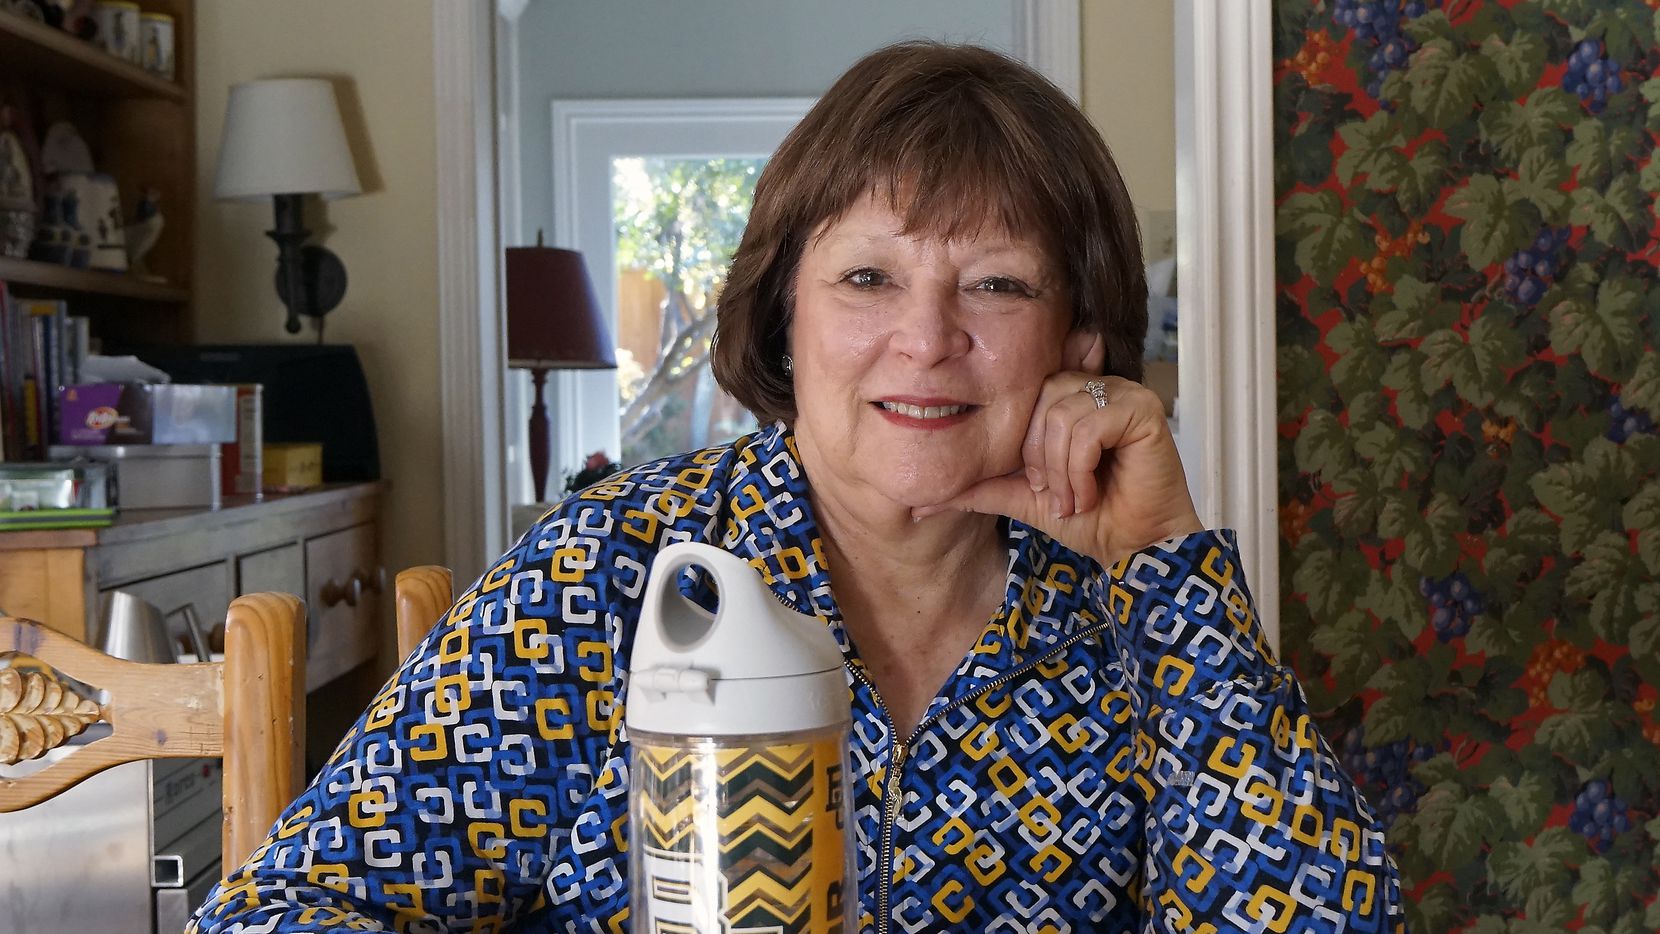 Bridget Bell, 65, of Dallas says drinking 72 ounces of water a day helps her feel full. She’s lost enough weight that she no longer has acid reflux.